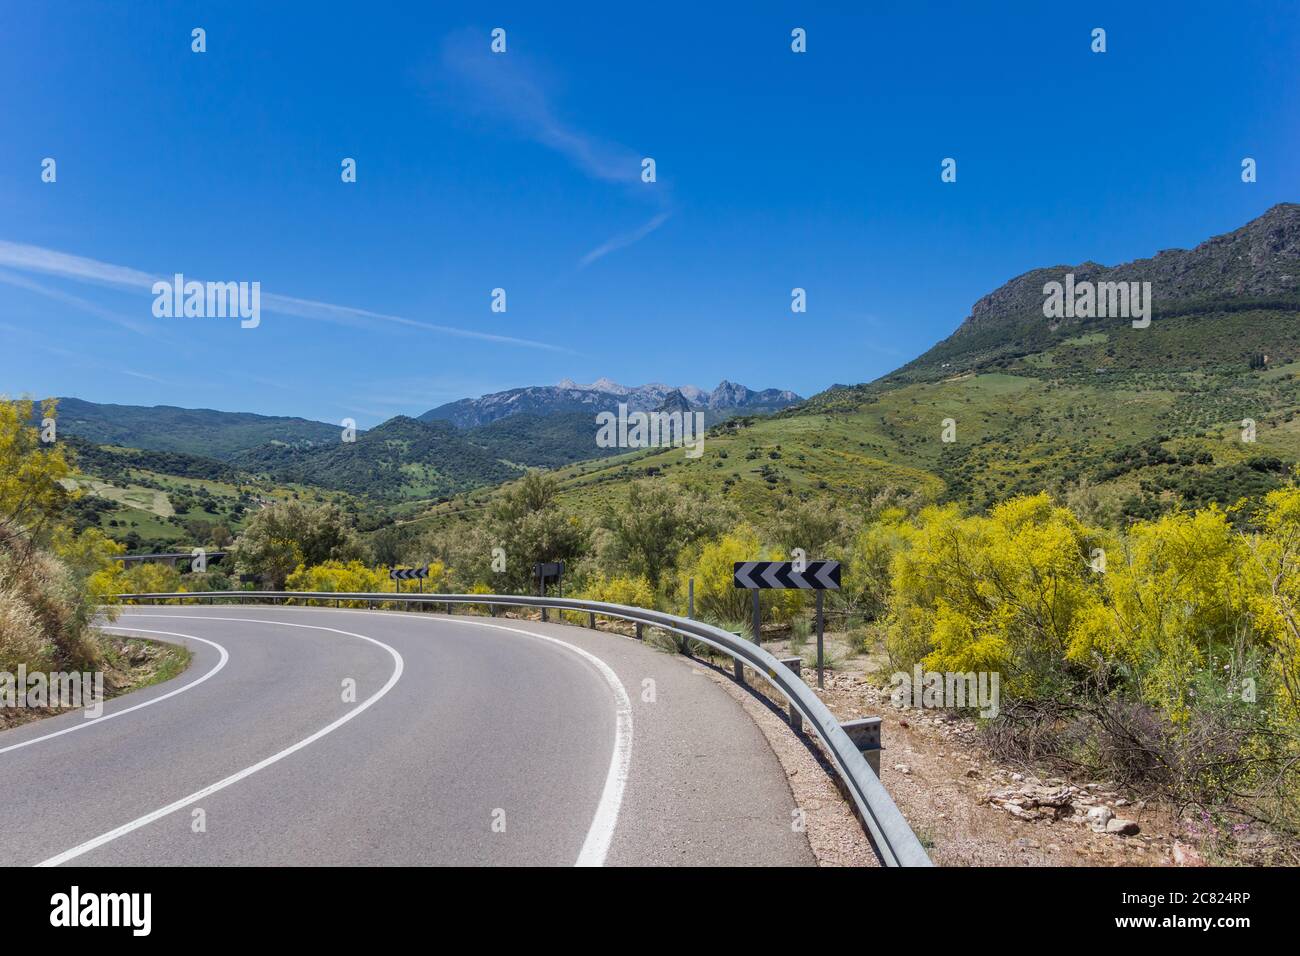 Curve in the road through Grazalema national park, Spain Stock Photo